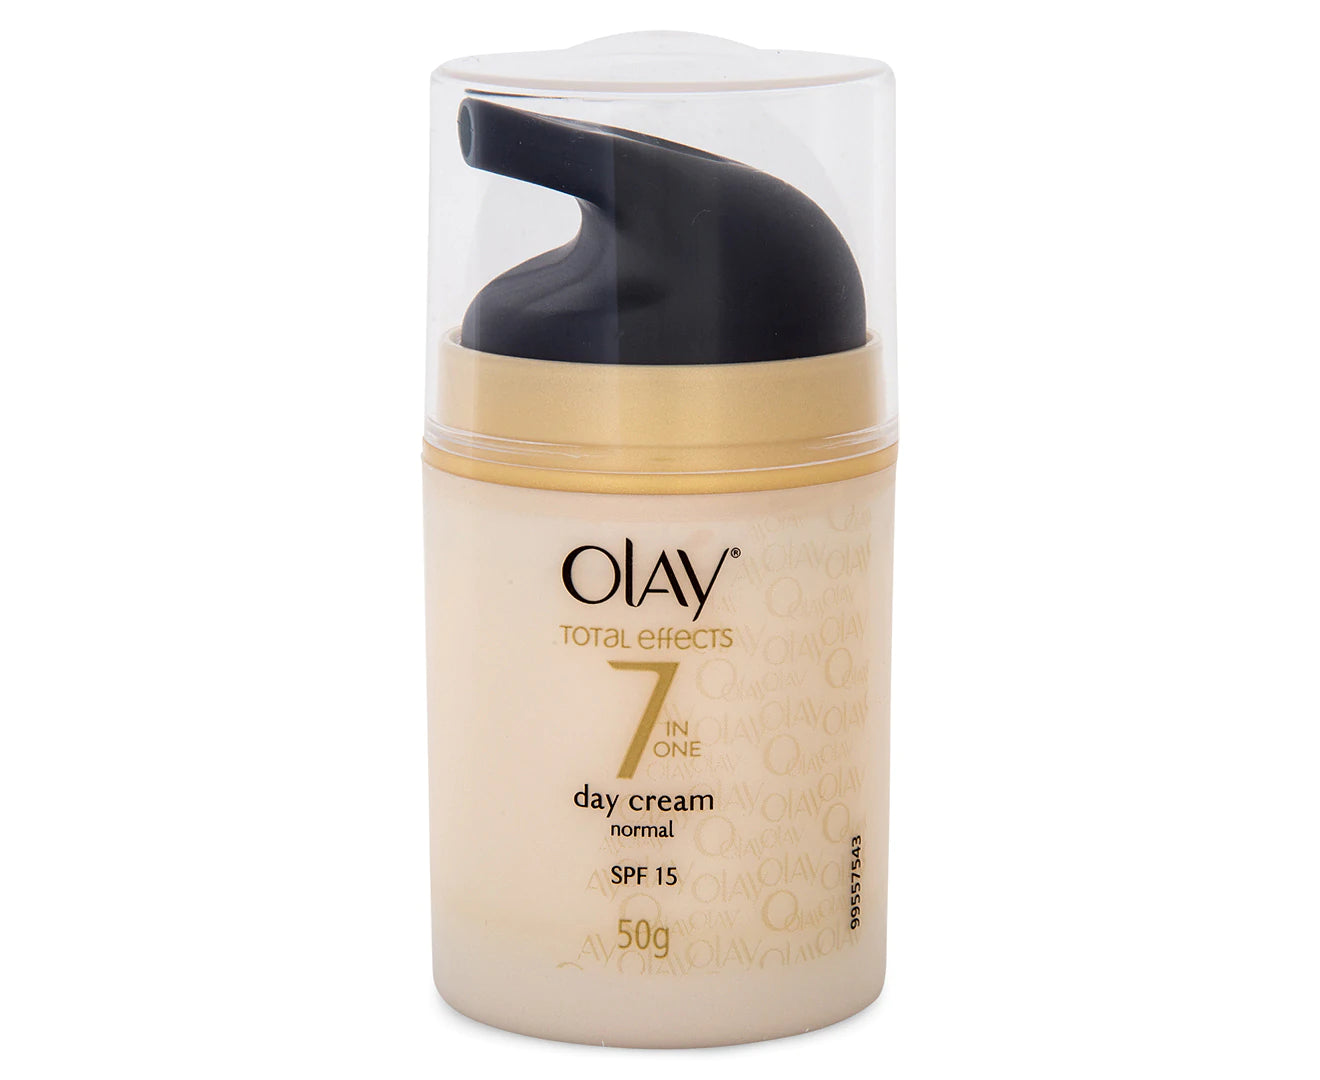 OLAY Radiance Limited Edition Olay Total Effects Day Cream 50g & Water Bottle Set - Homeware Discounts